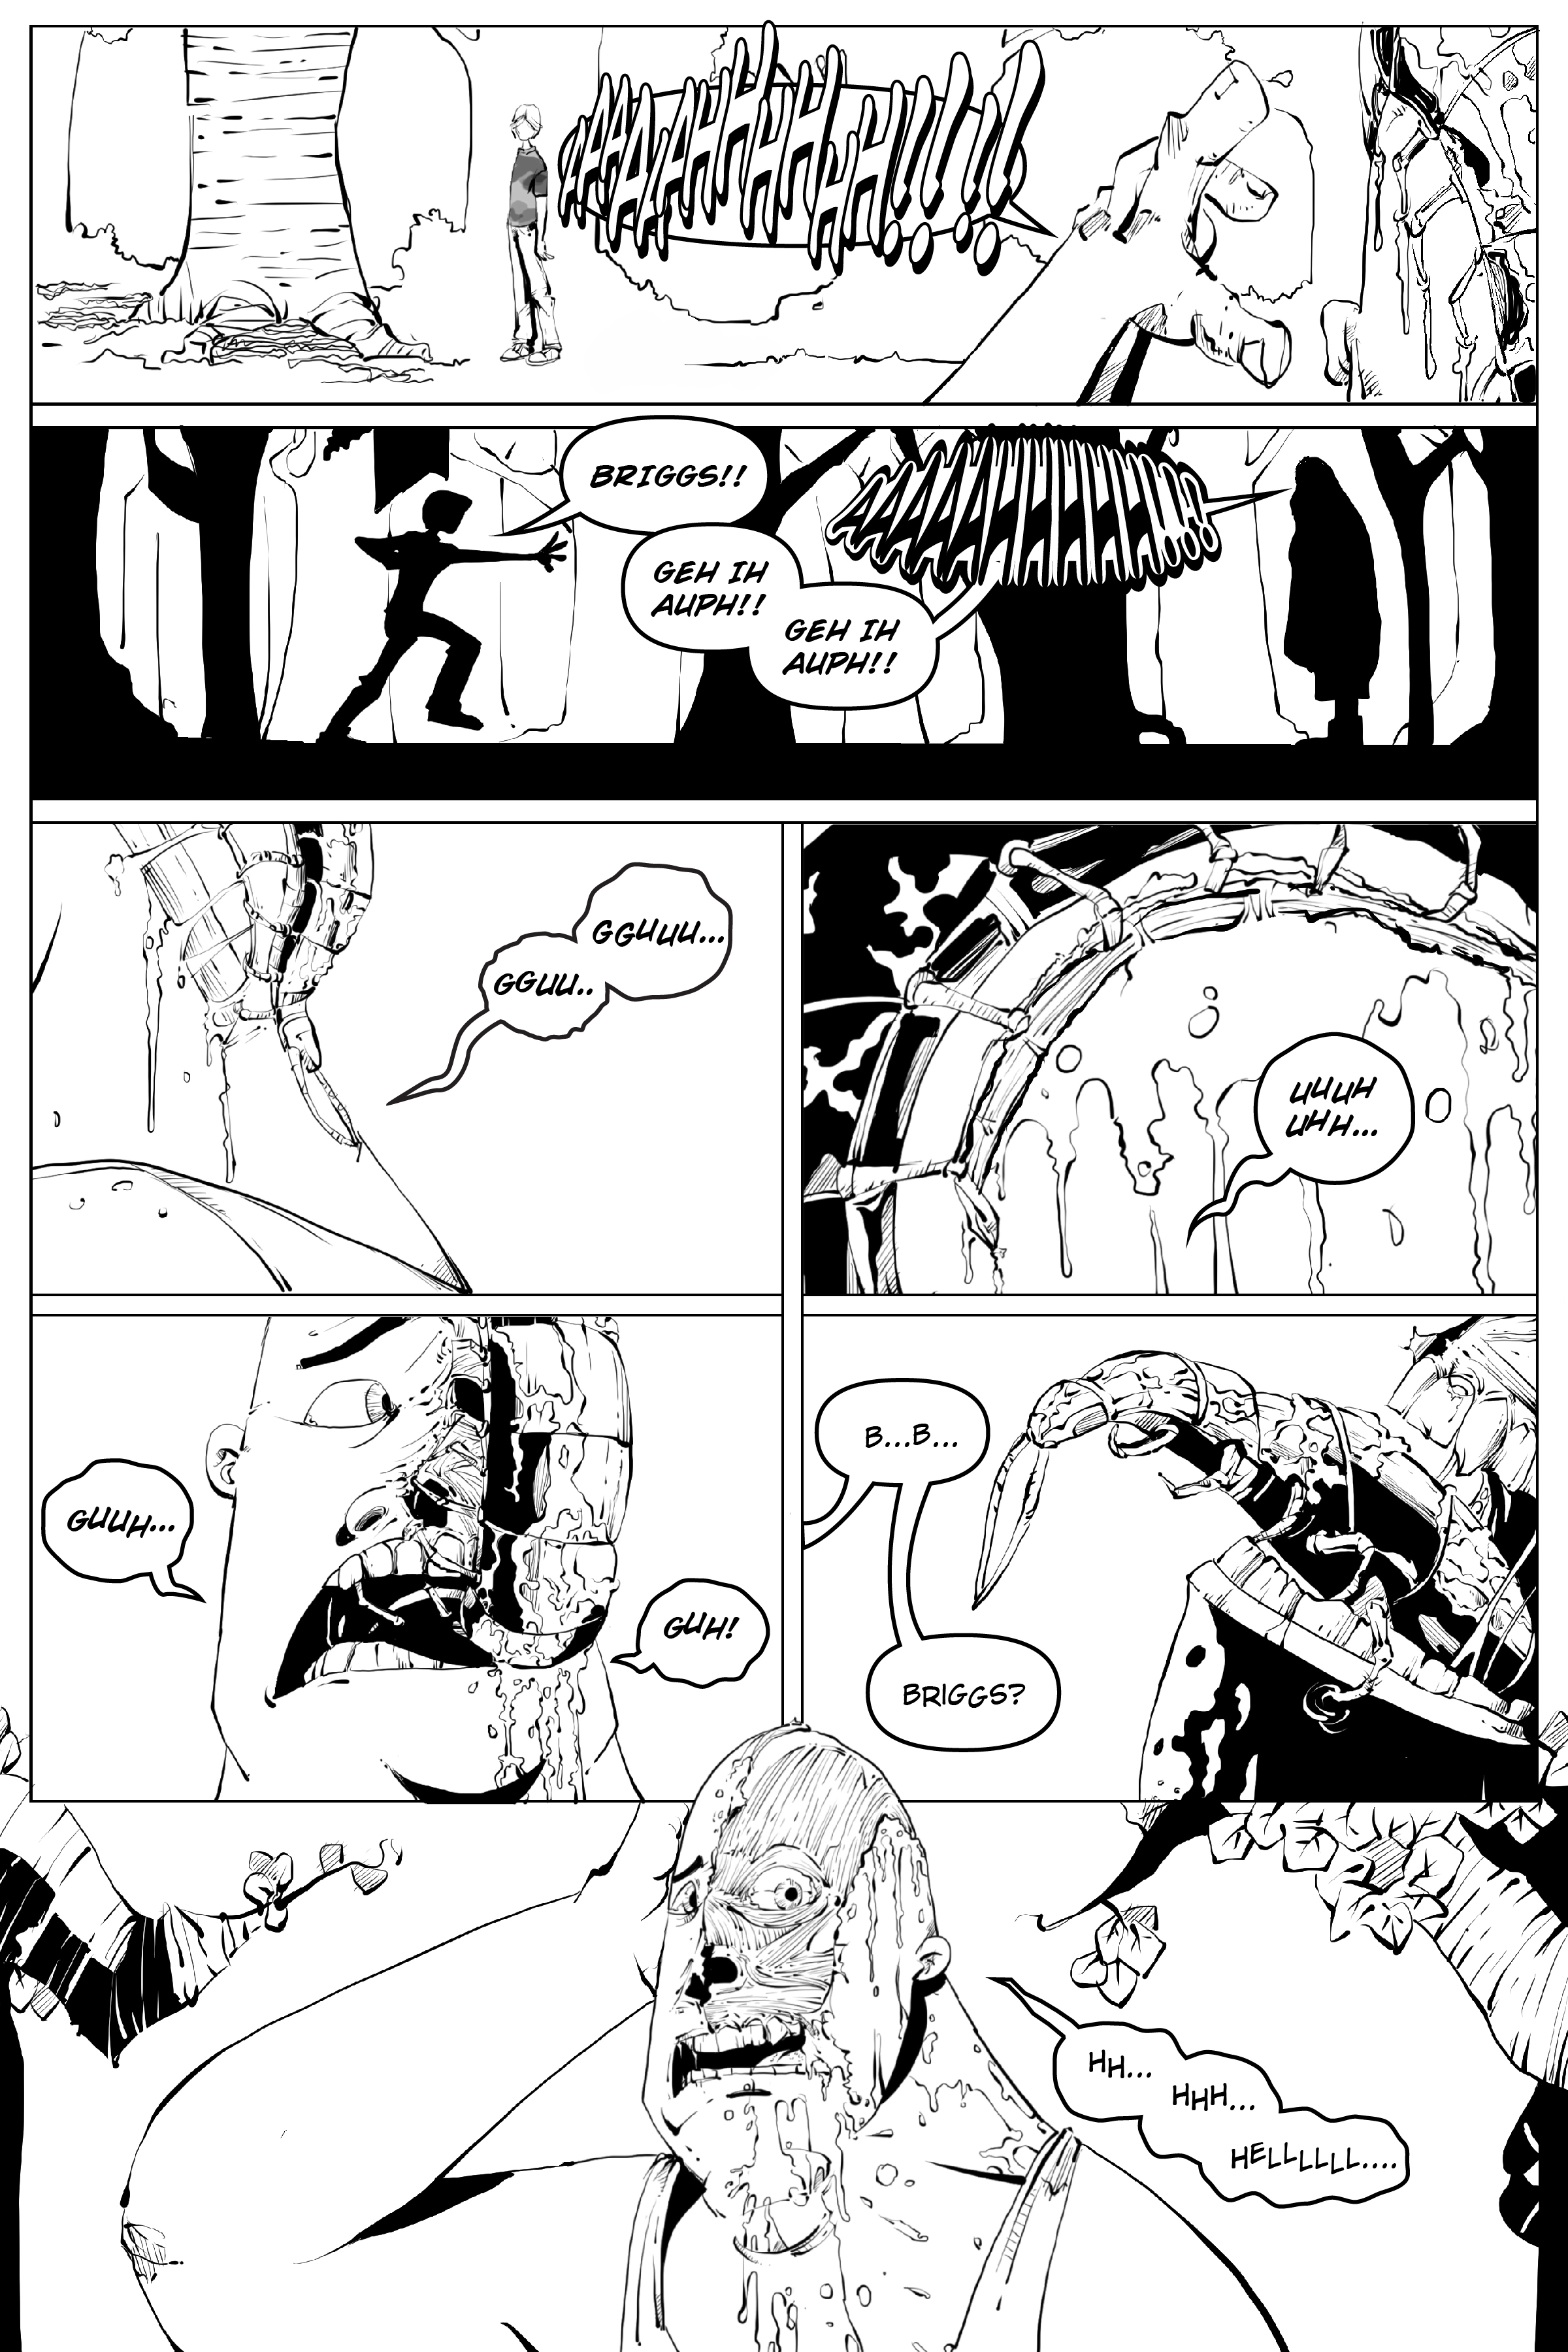 TheQuake_Page 4 Lettered 2_10.jpg